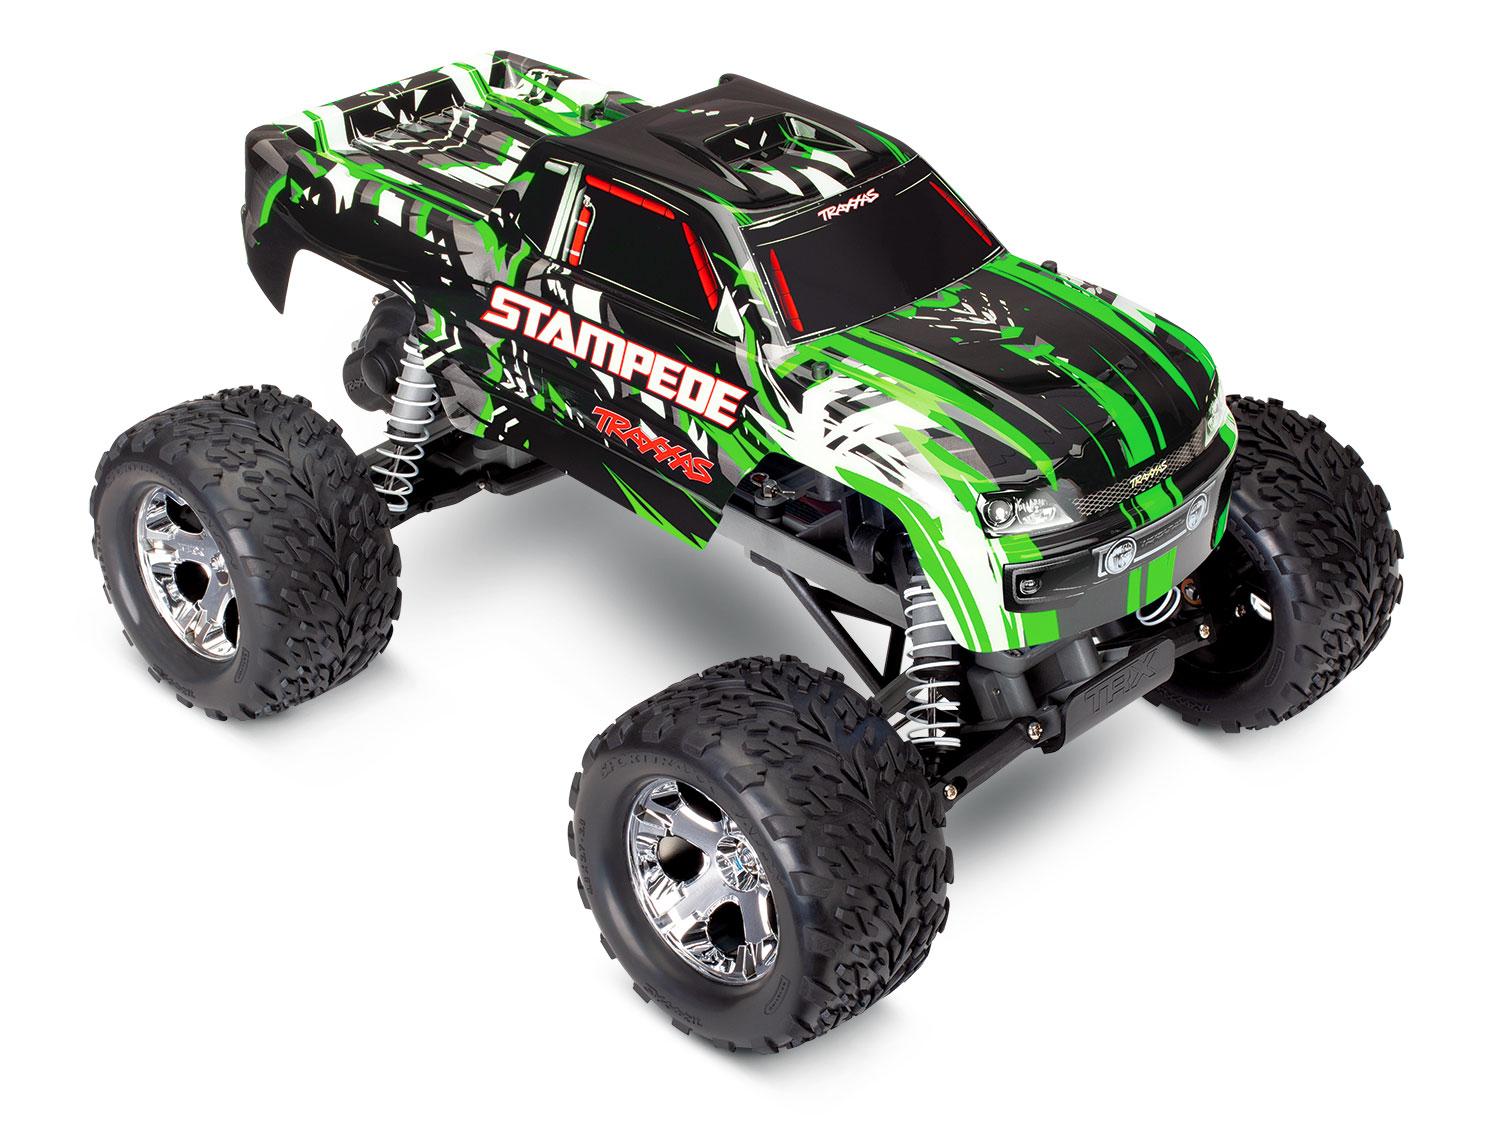 Cheap Traxxas Rc Cars: Affordable options for Traxxas RC cars